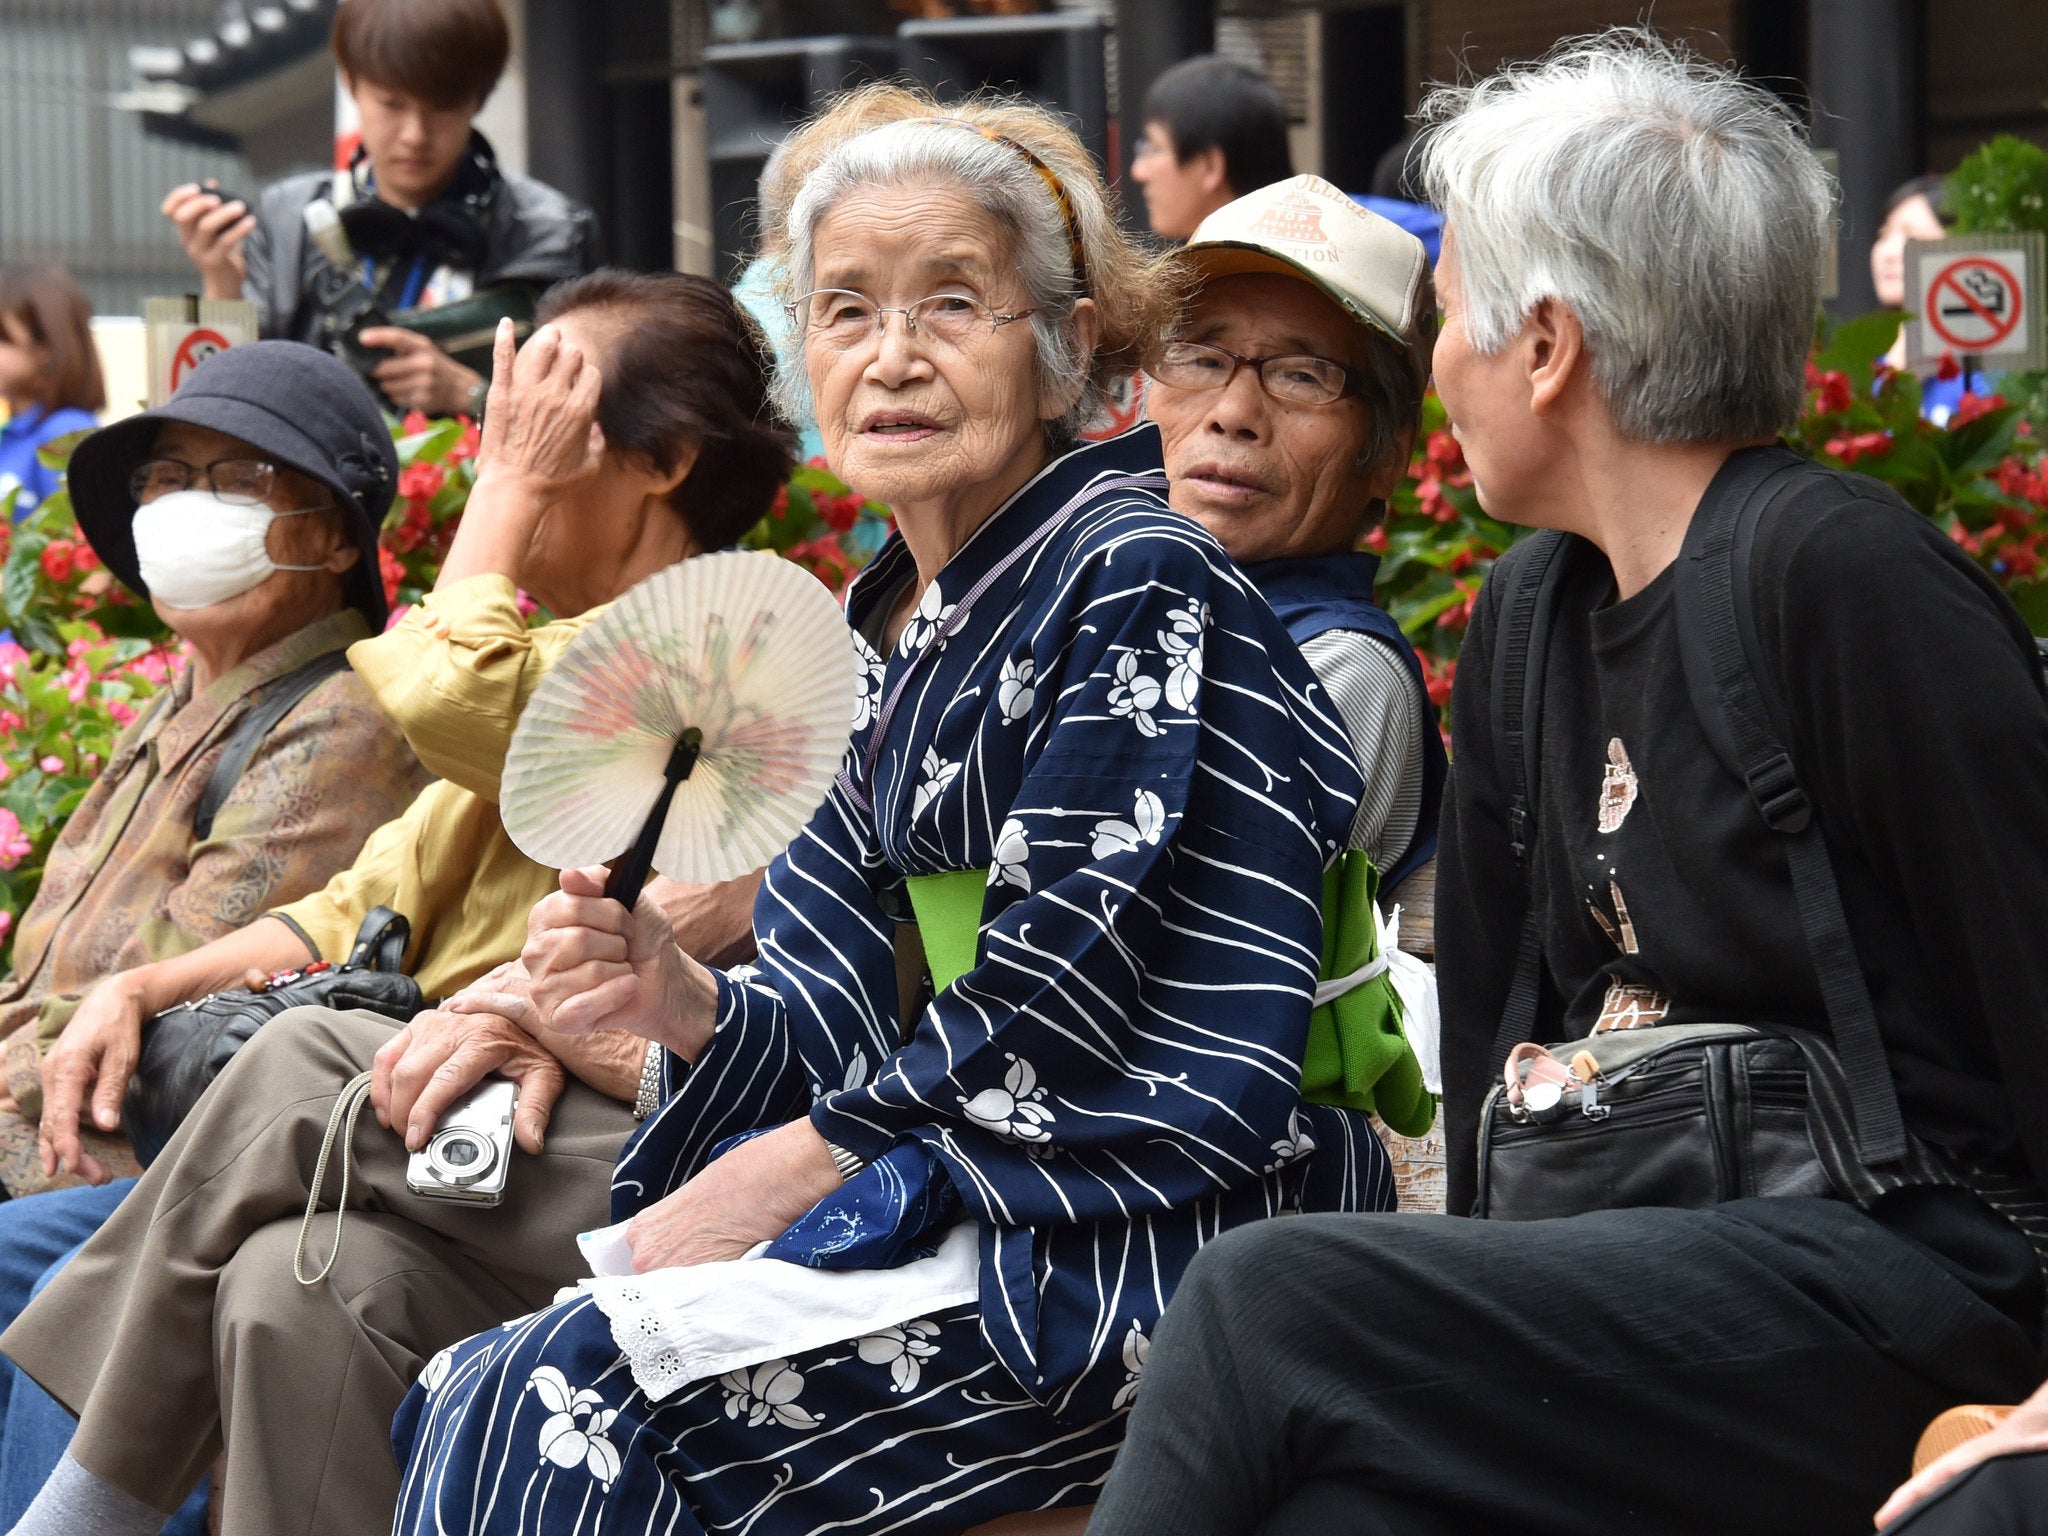 Elderly residents rest in the grounds of a temple in Tokyo on September 15, 2014 as the country marks Respect-for-the-Aged-Day. The number of people aged 65 or older in Japan is at a record 32.96 million, accounting for an all-time high of 25.9 percent of the nation's total population, the government announced. AFP PHOTO / Yoshikazu TSUNO